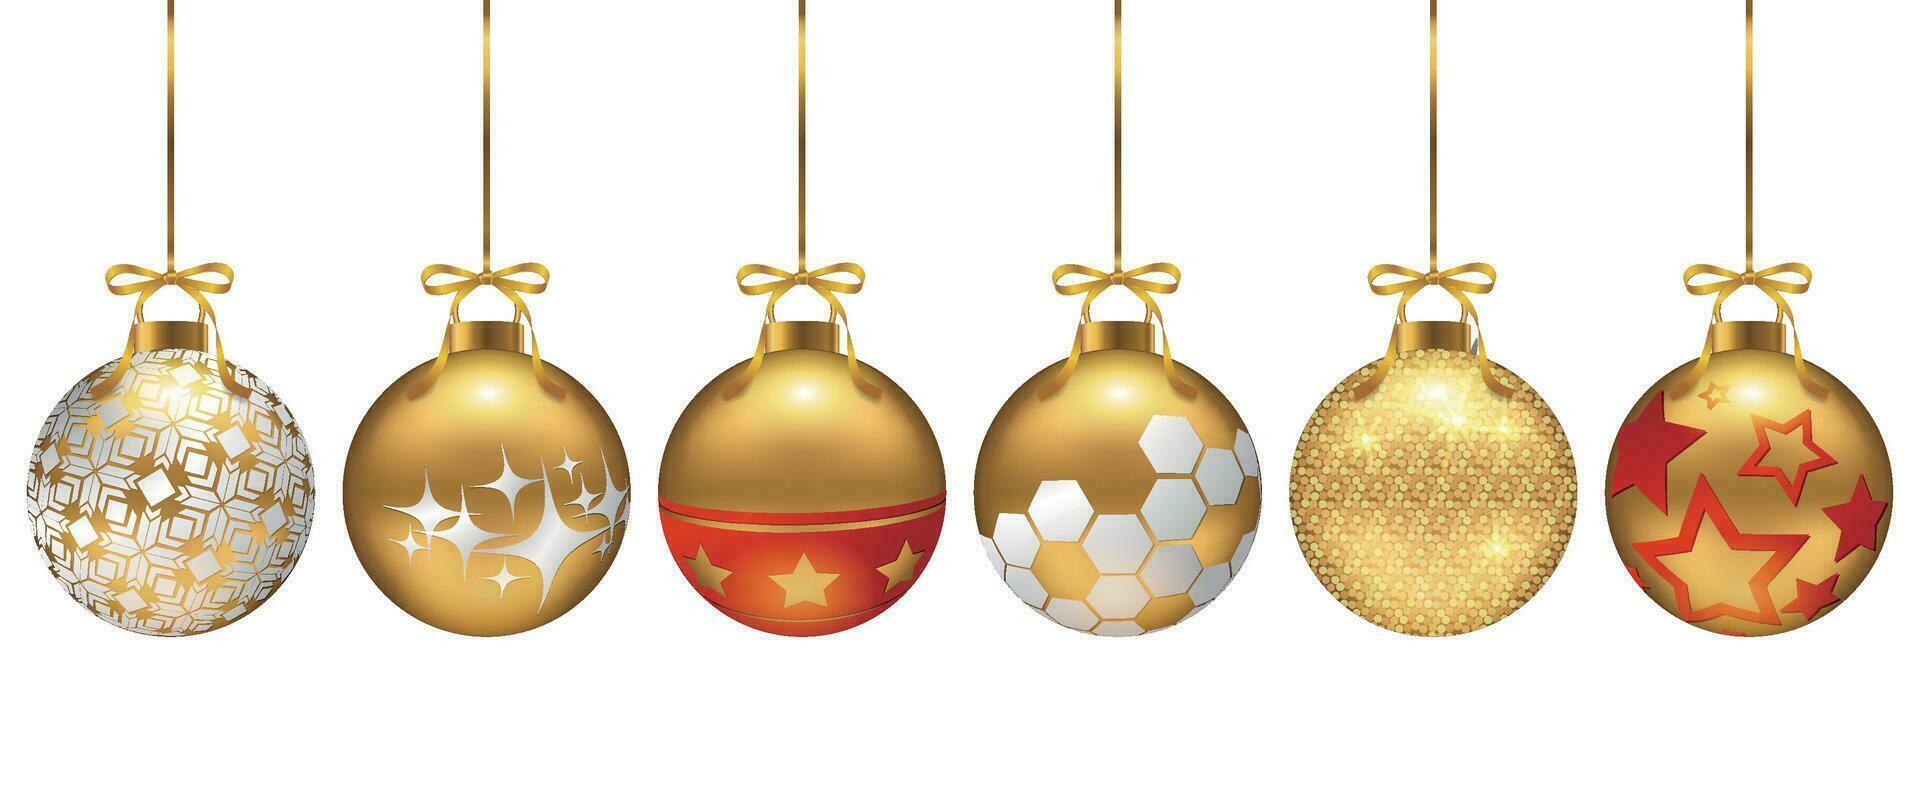 Set of Christmas decorations in different patterns with metallic shine, suitable for posters, cards, sale decorations vector